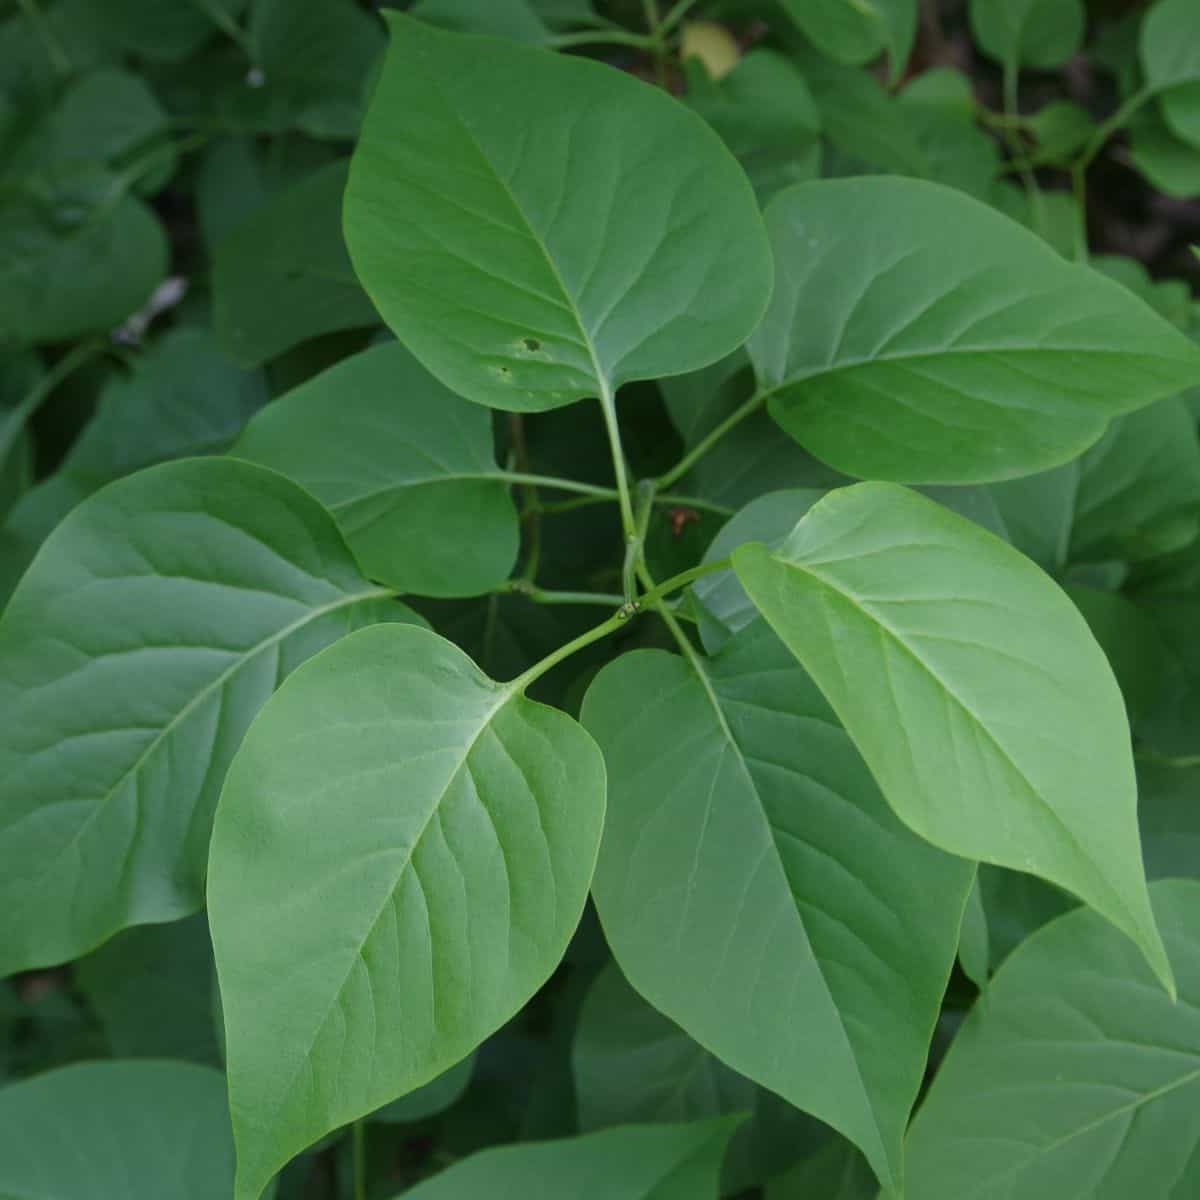 Close up of the leaves of a lilac shrub